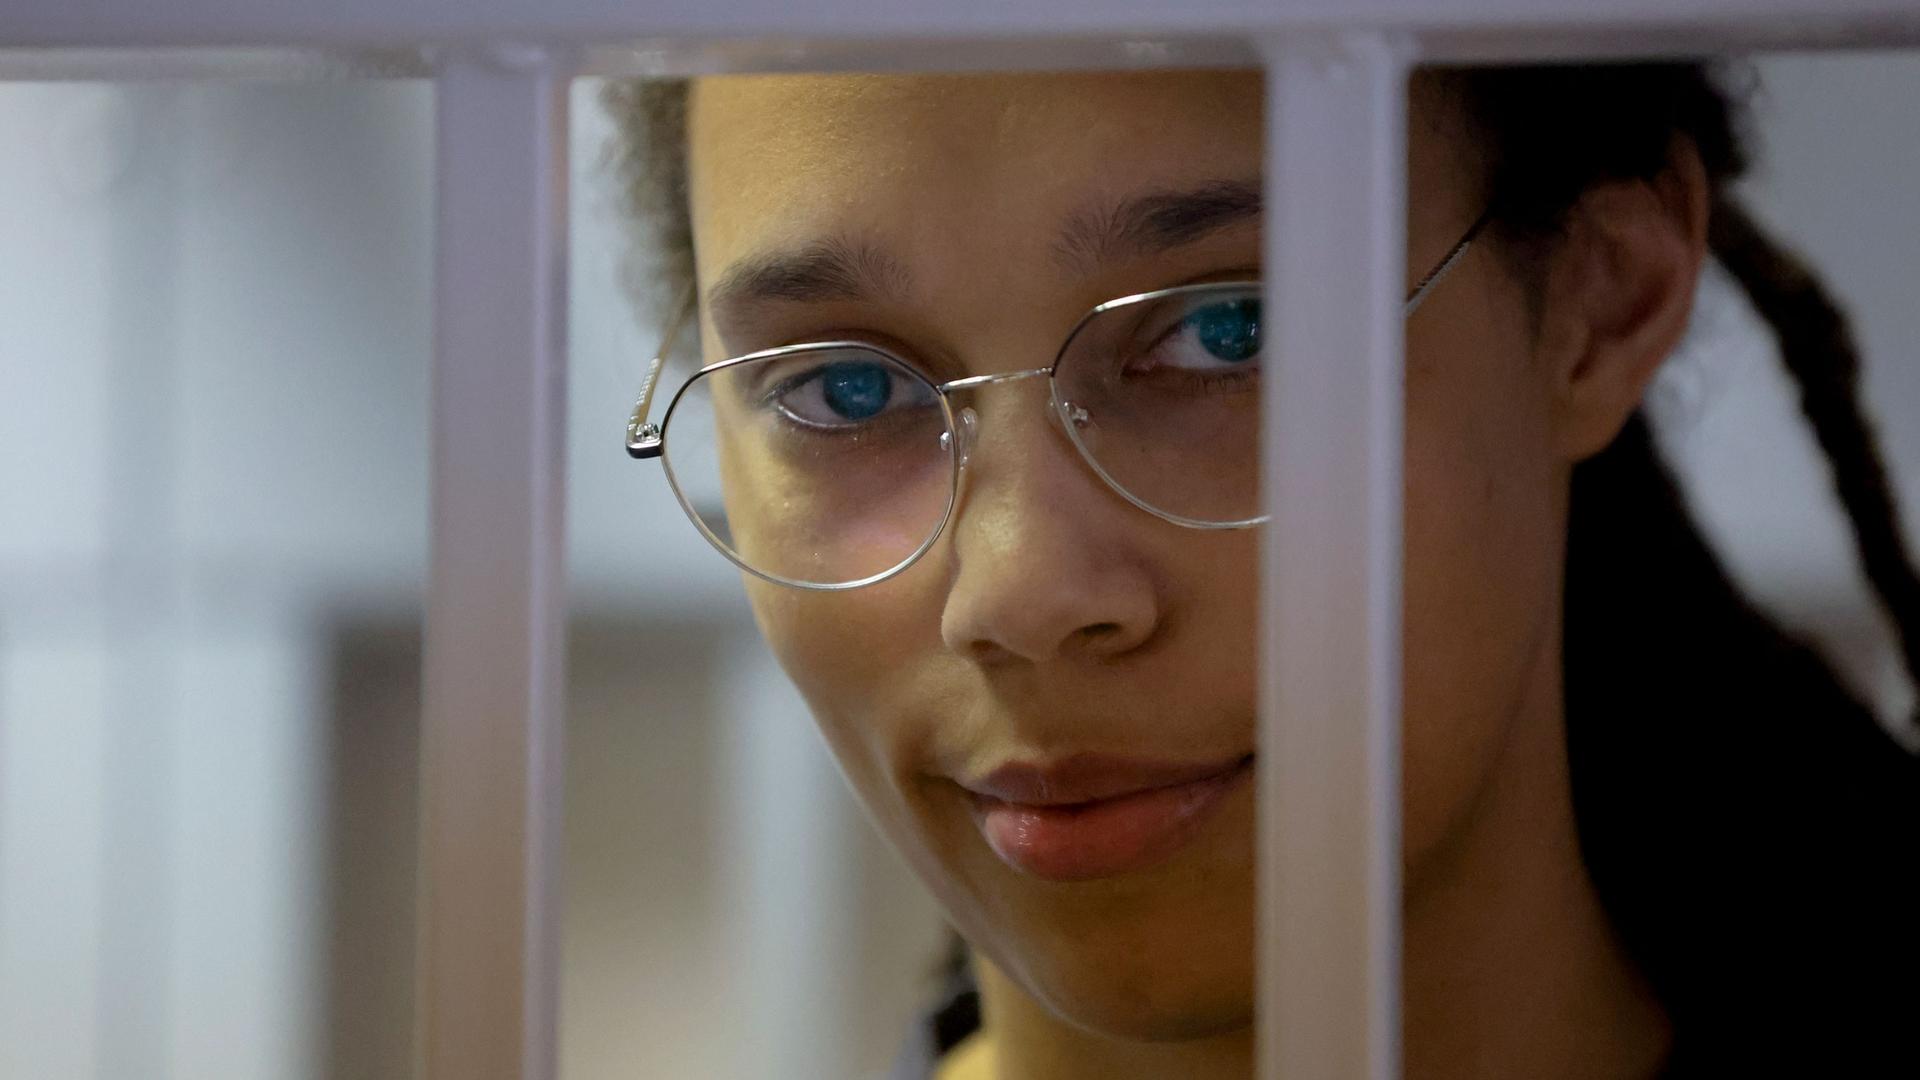 WNBA star and two-time Olympic gold medalist Brittney Griner stands in a cage in a courtroom prior to a hearing in Khimki just outside Moscow, Russia, Thursday, Aug. 4, 2022. 